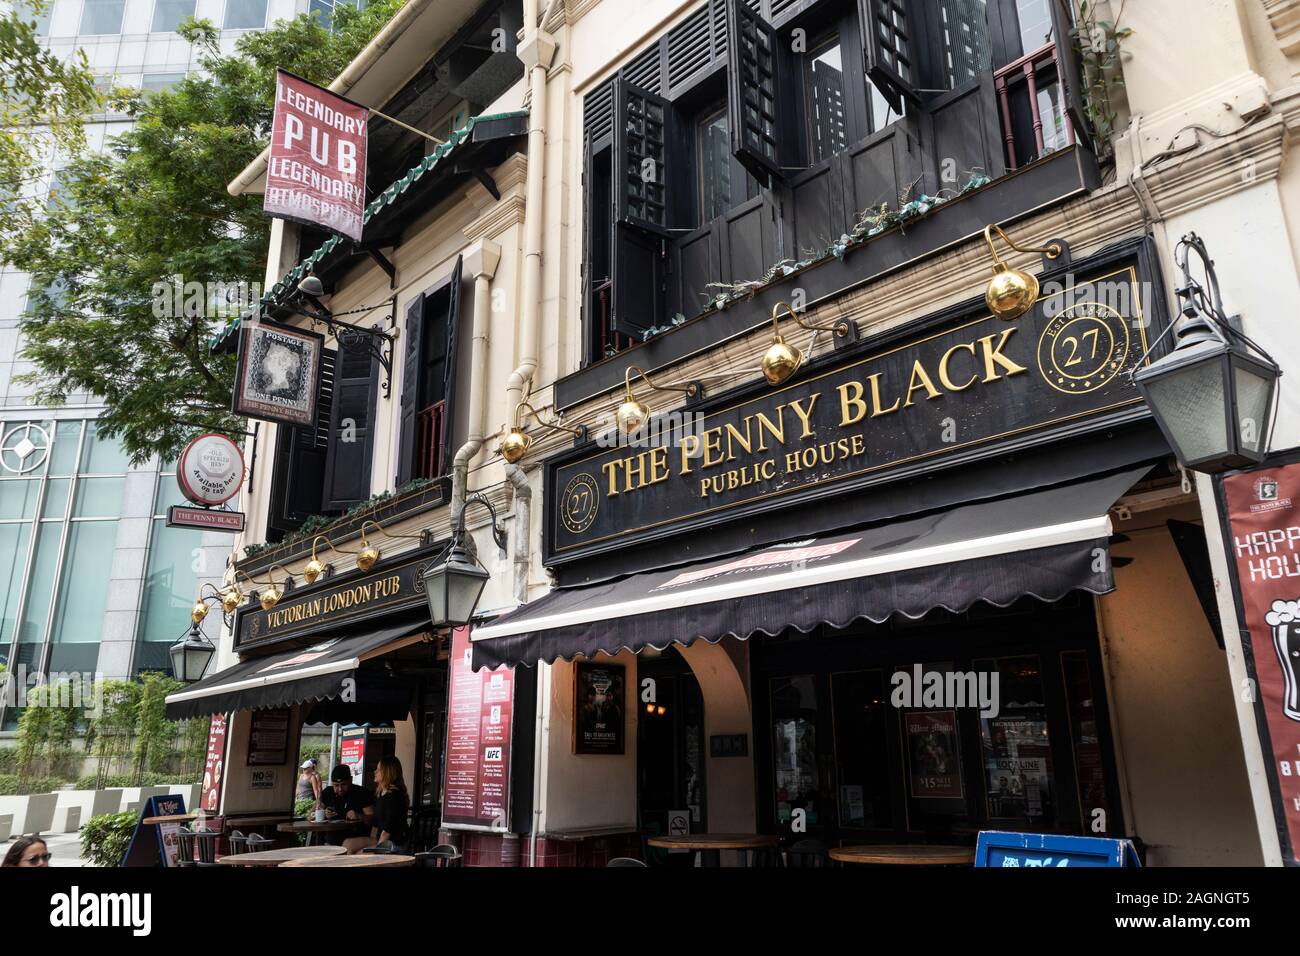 The Victorian London Pub and The Penny Black Pub on the River Sing opposite Clarke Quay, Singapore Stock Photo